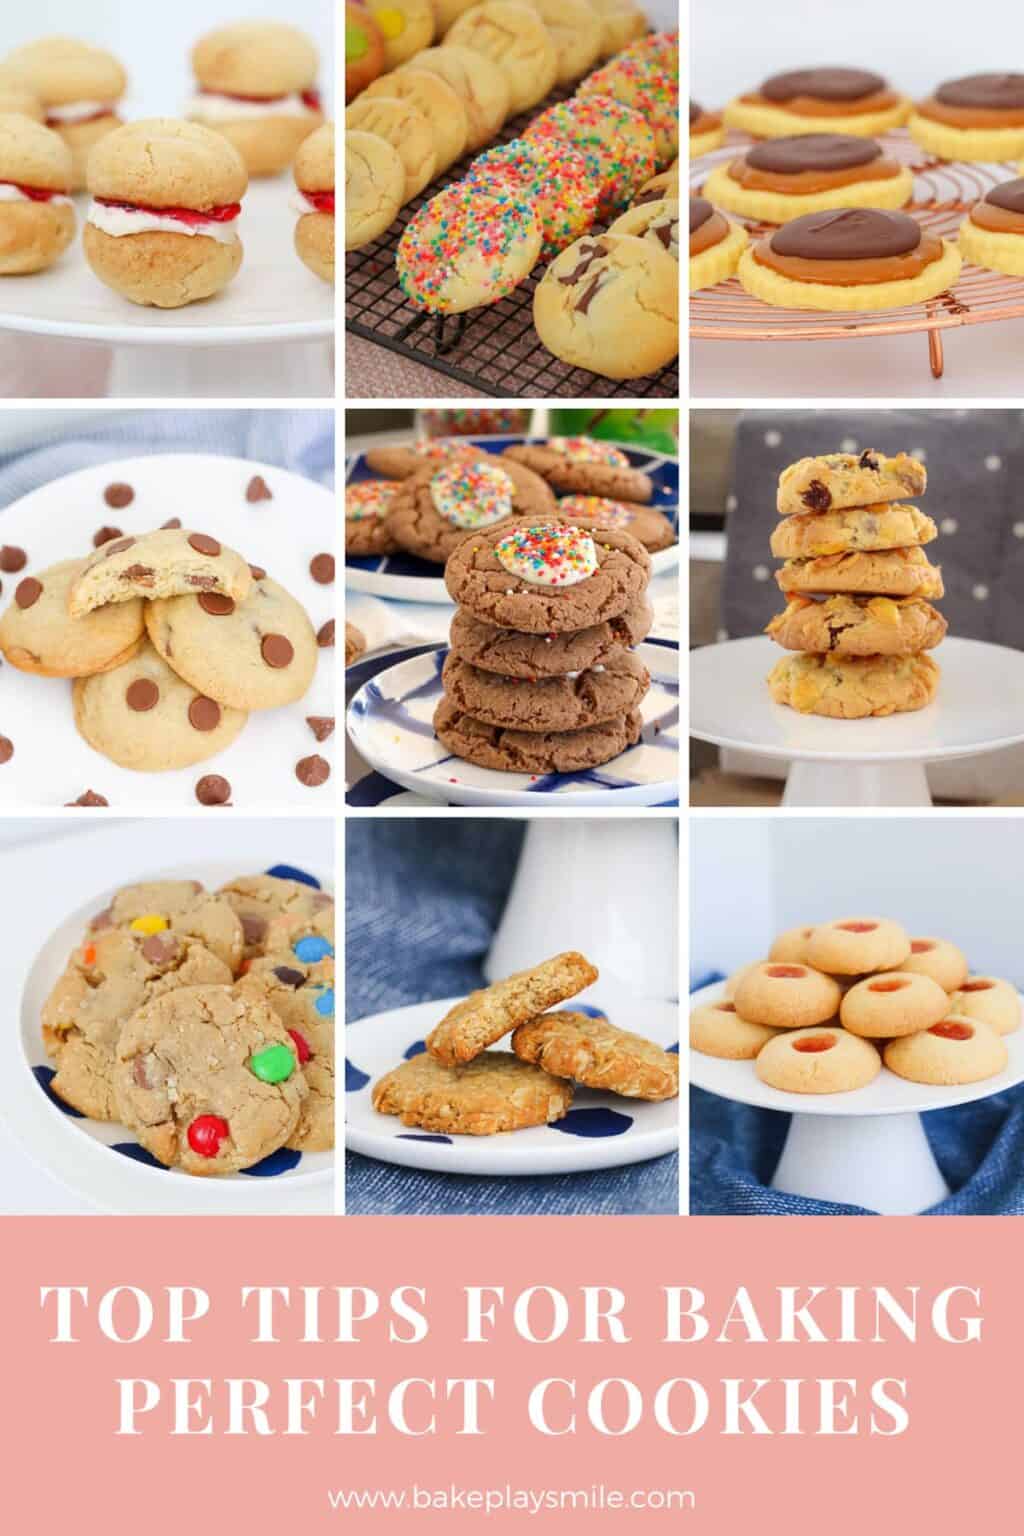 10 Simple Tips For Baking Perfect Cookies - Bake Play Smile